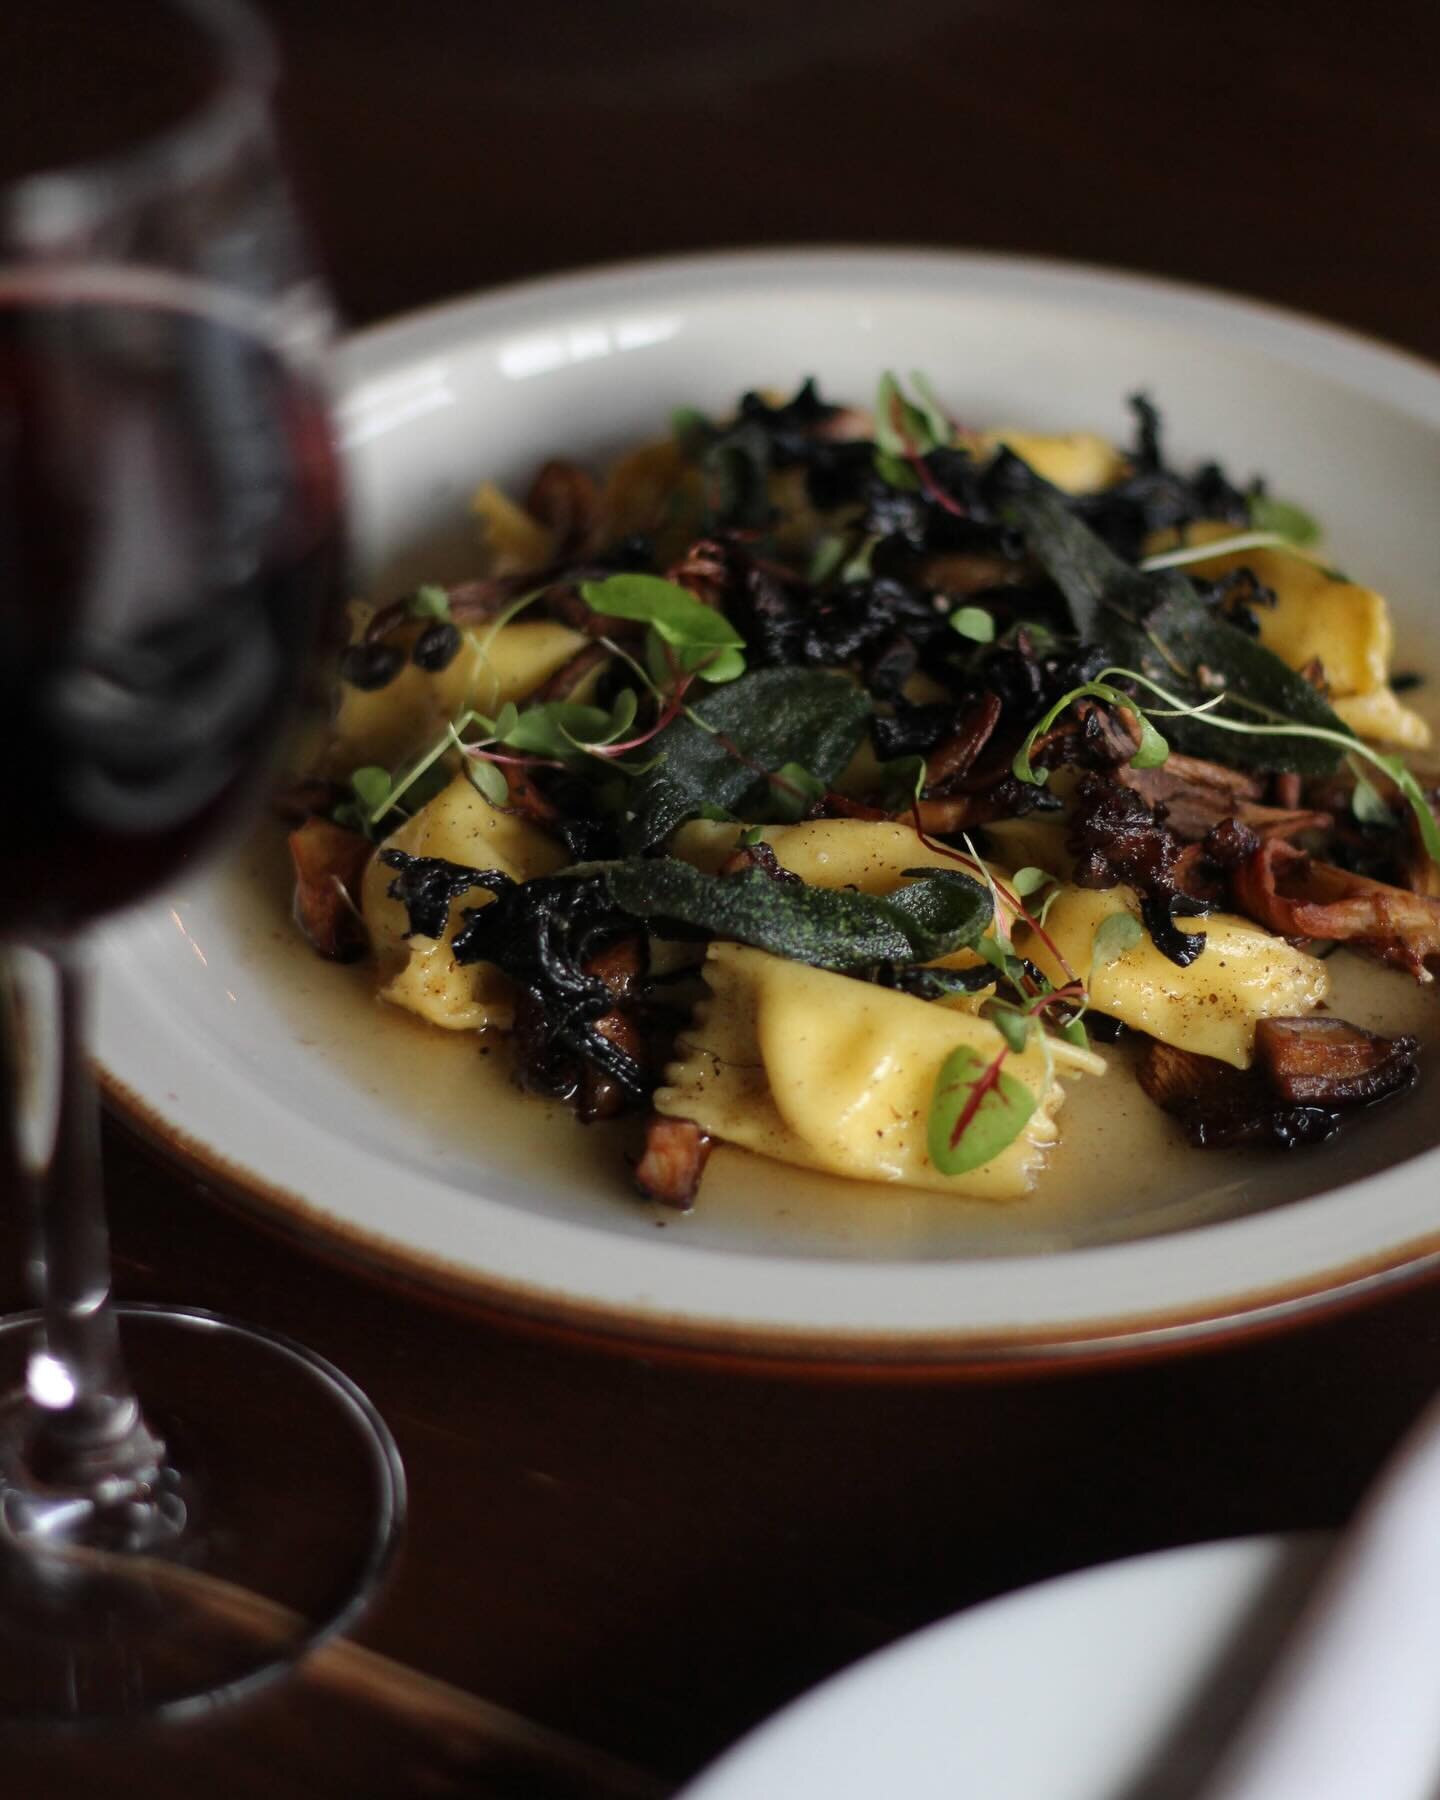 Add our Bellevue location to your plans this weekend and try our new menu. This agnolotti filled with ricotta is a hearty, delicious vegetarian dish with roasted mushrooms, brown butter and sage. It&rsquo;s getting us through shoulder season as we wa